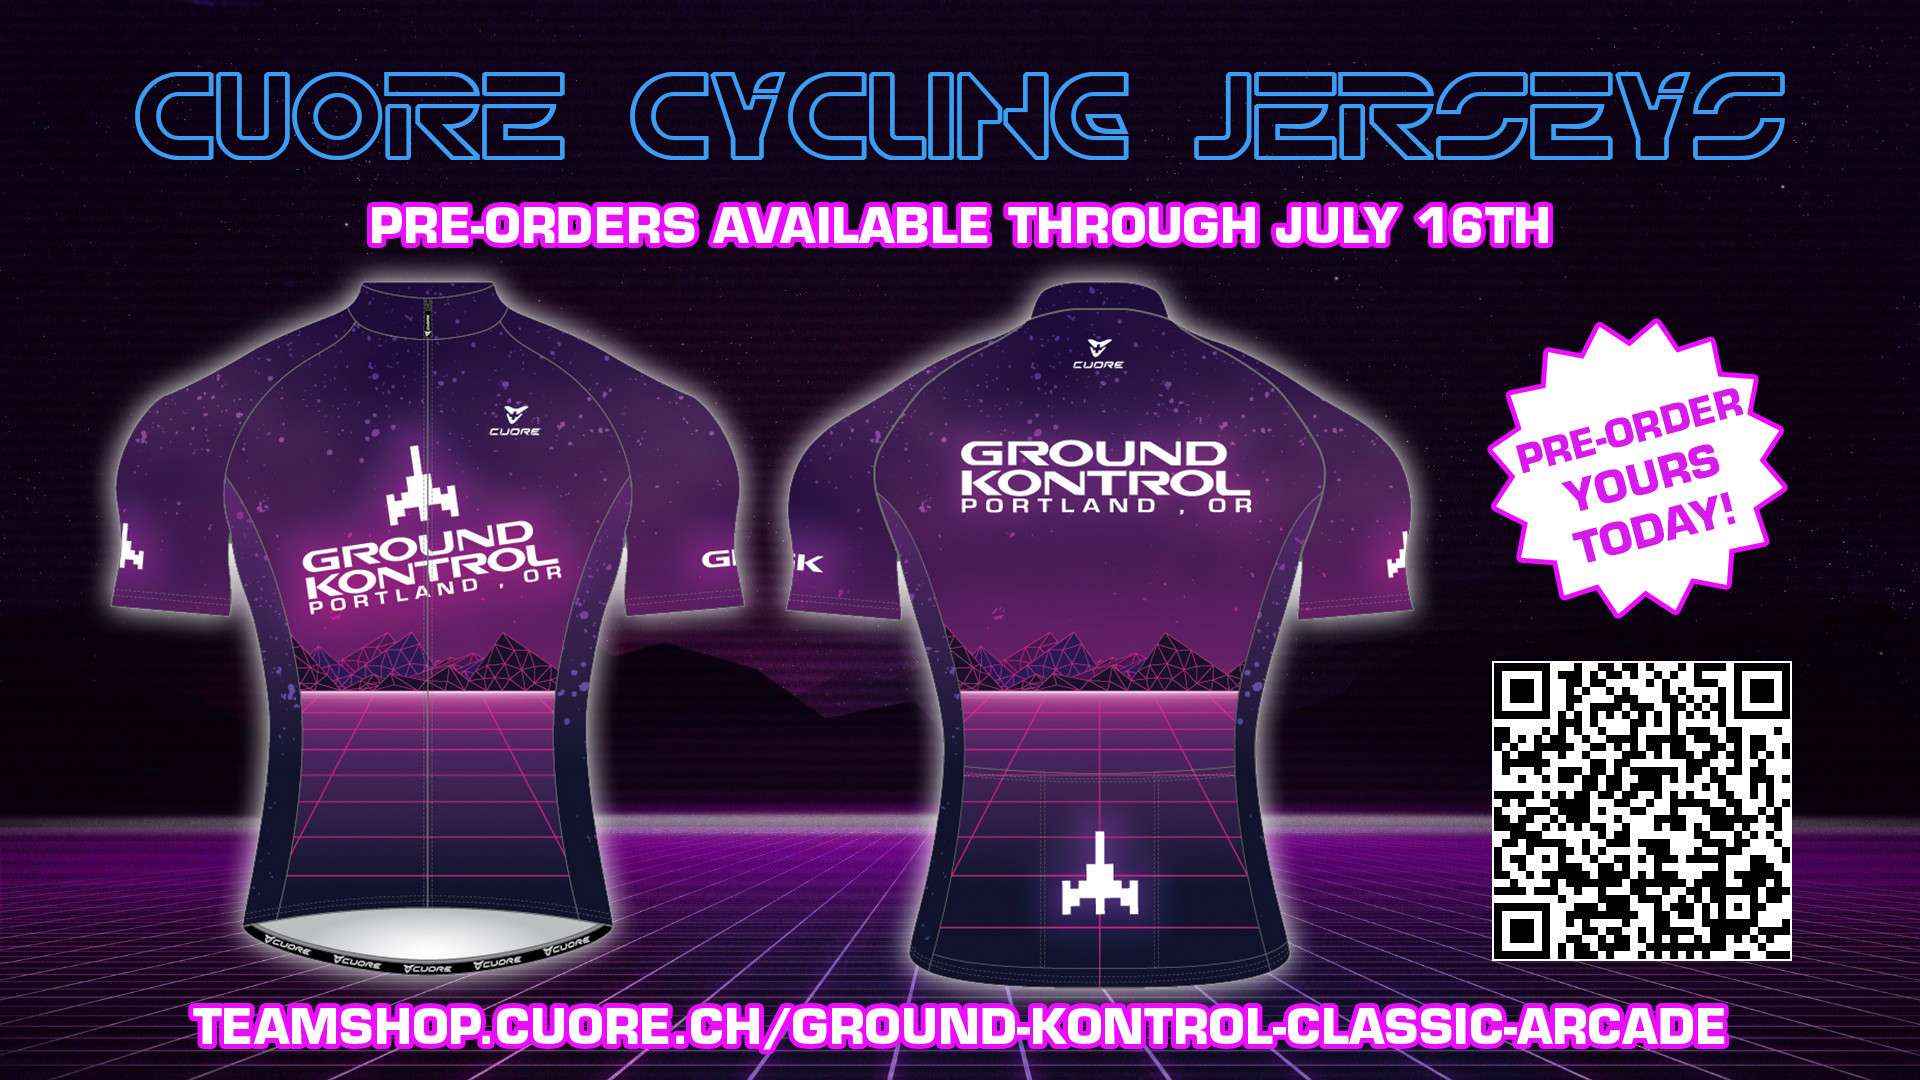 Cuore Custom Cycling Jerseys Available for Pre-order